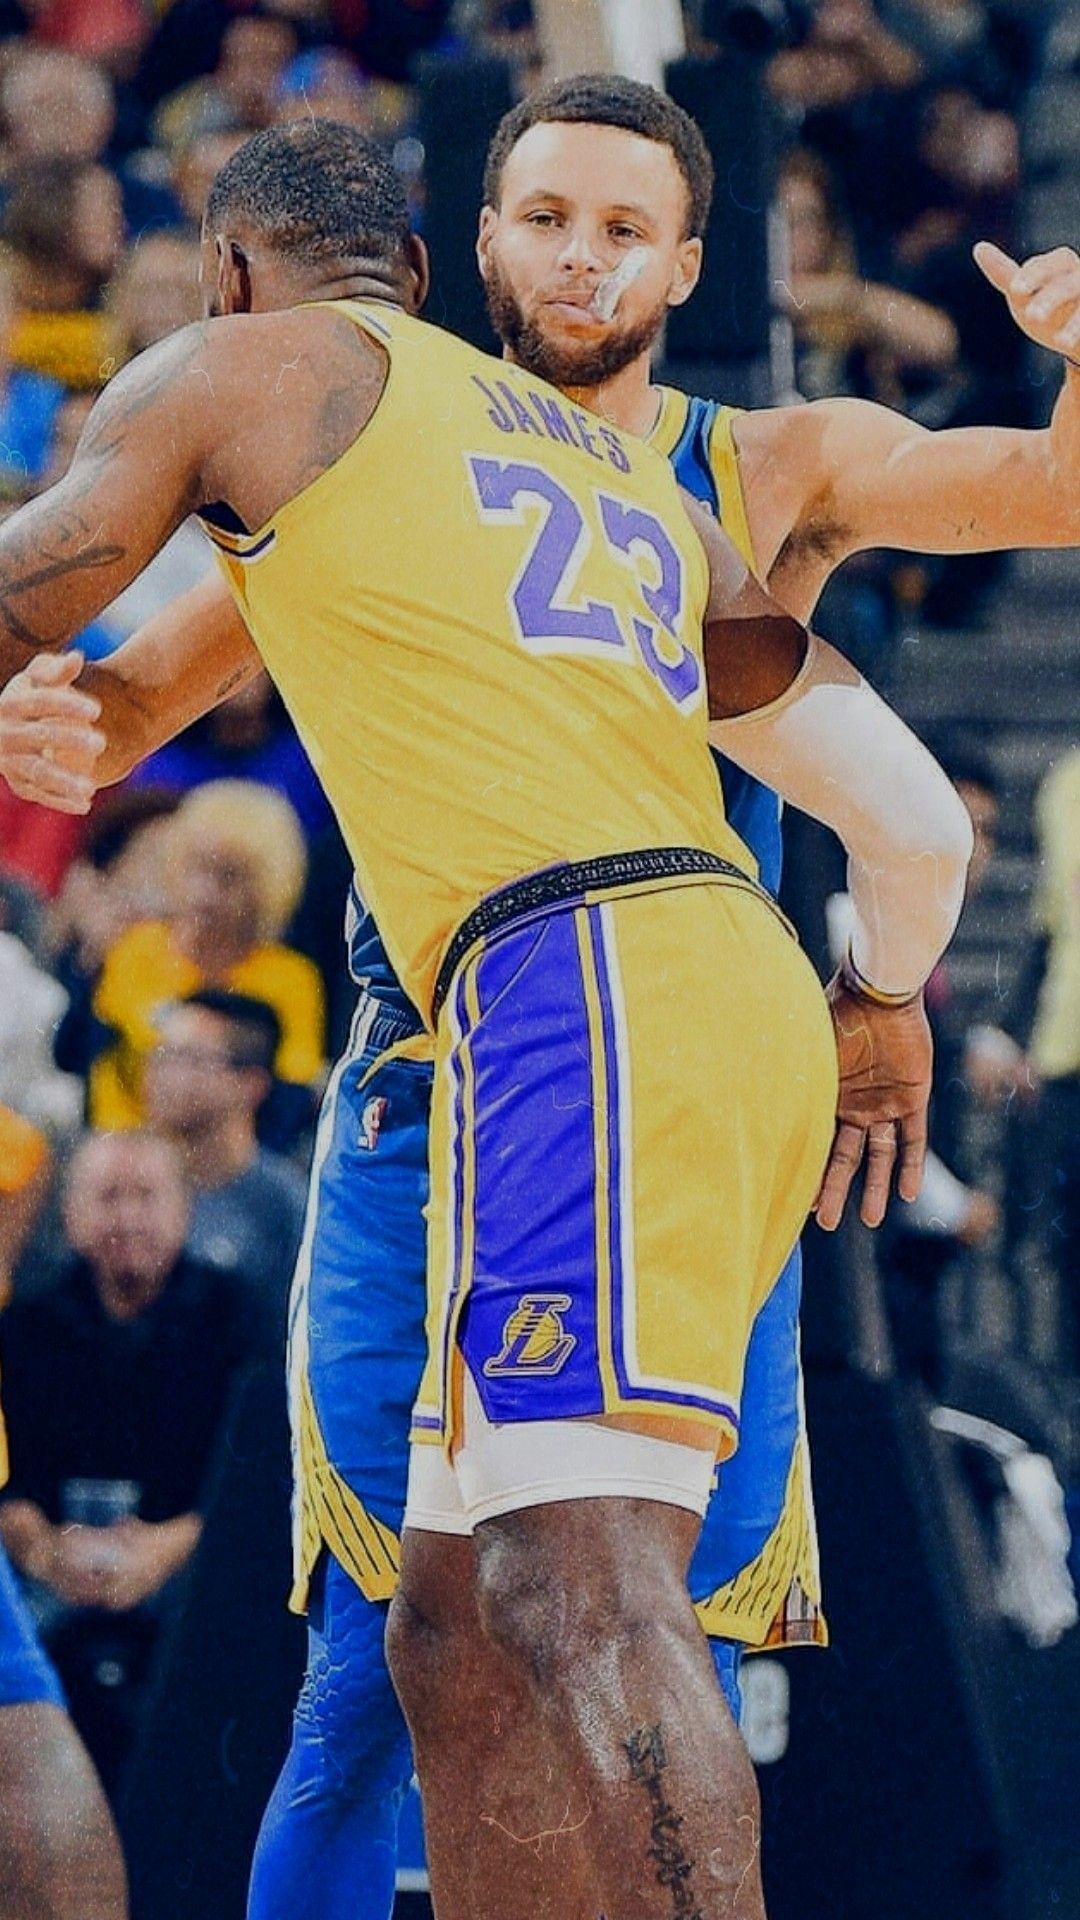 STEPHEN CURRY AND LEBRON JAMES WALLPAPER. Nba